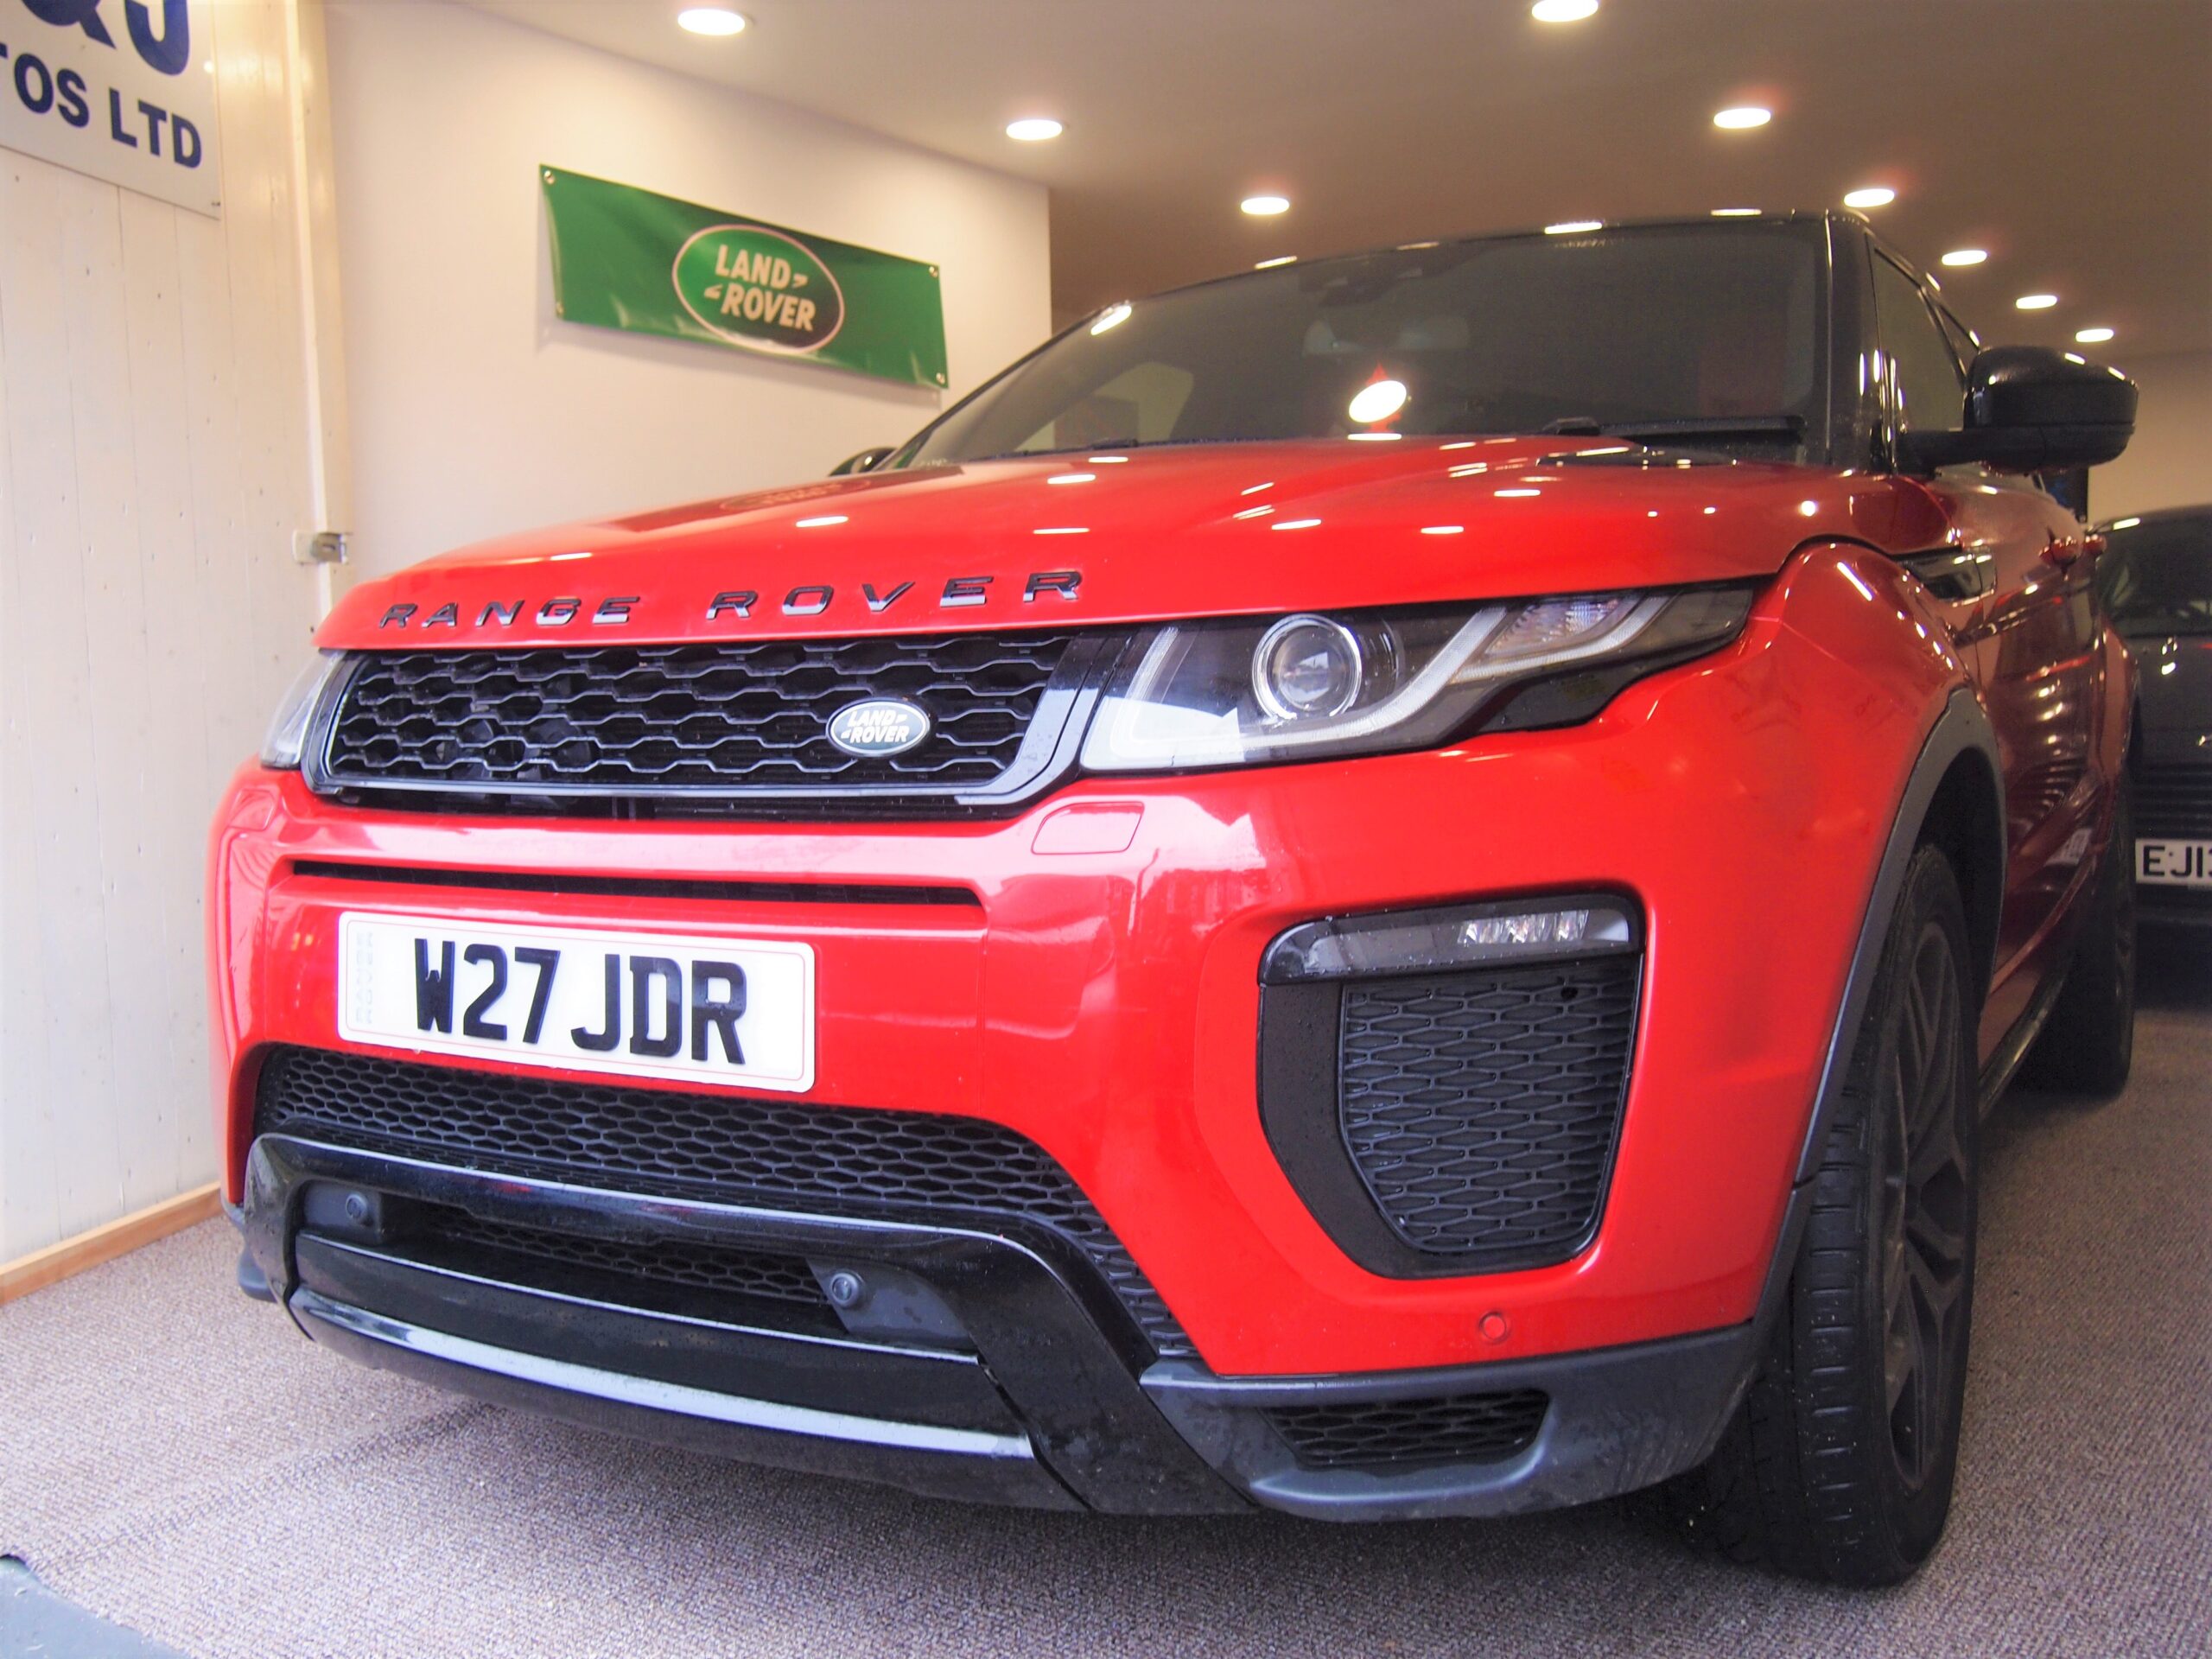 Land Rover Range Rover Evoque 2.0 TD4 HSE Dynamic Auto 4WD (s/s) 5dr